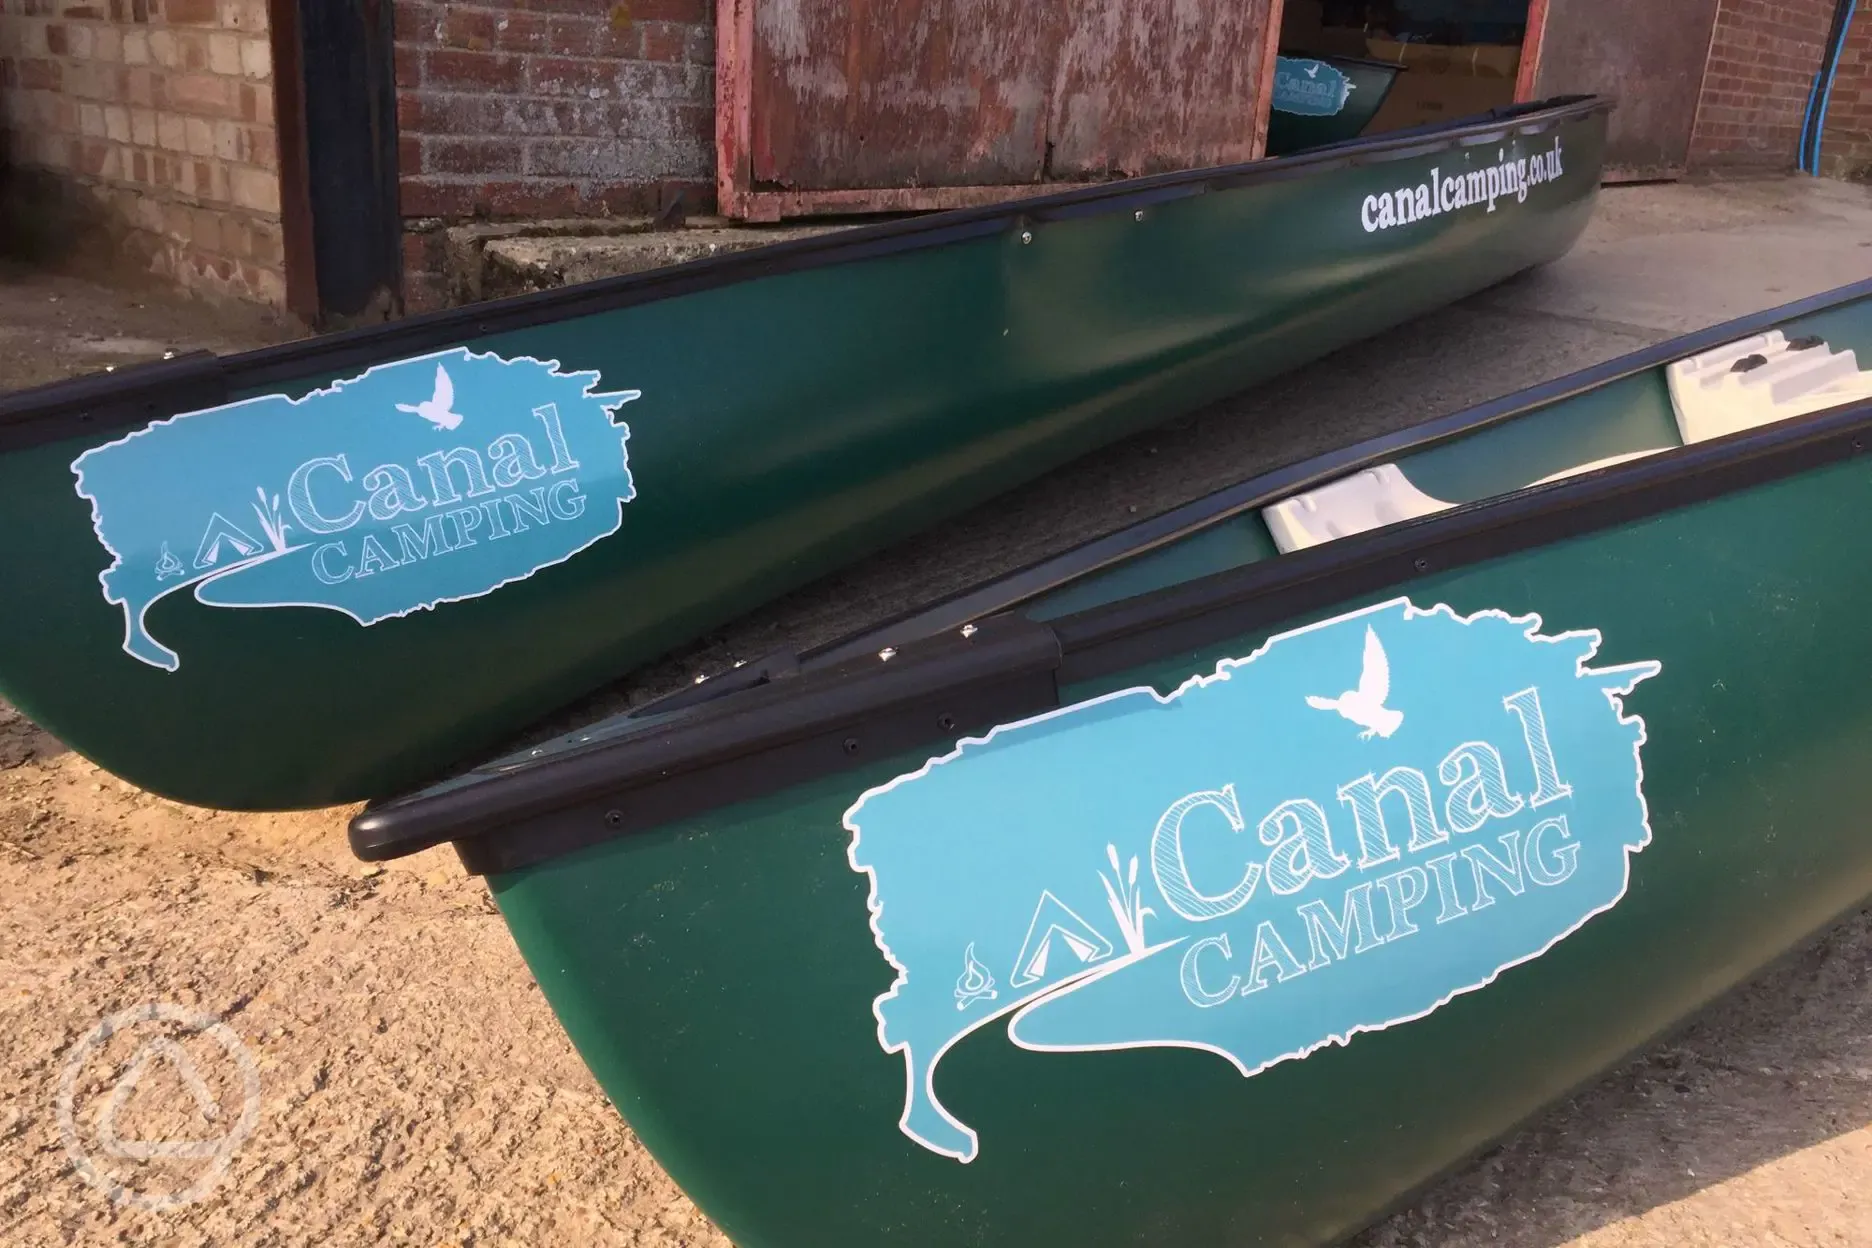 Canoes for hire